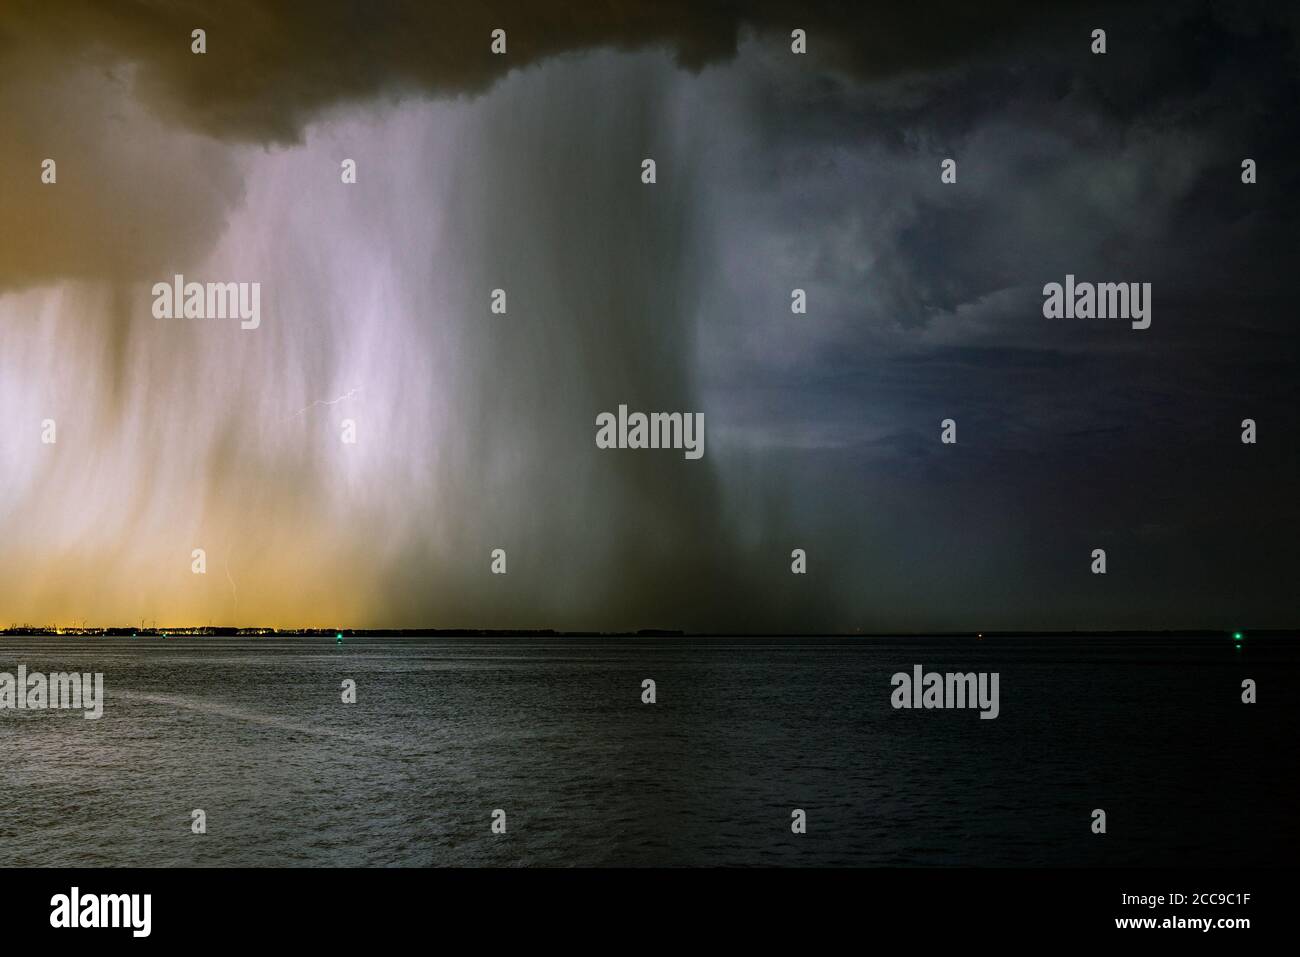 Dramatic nature image of a thunderstorm with distinct rain and hail shaft over a lake. Night time image. Stock Photo